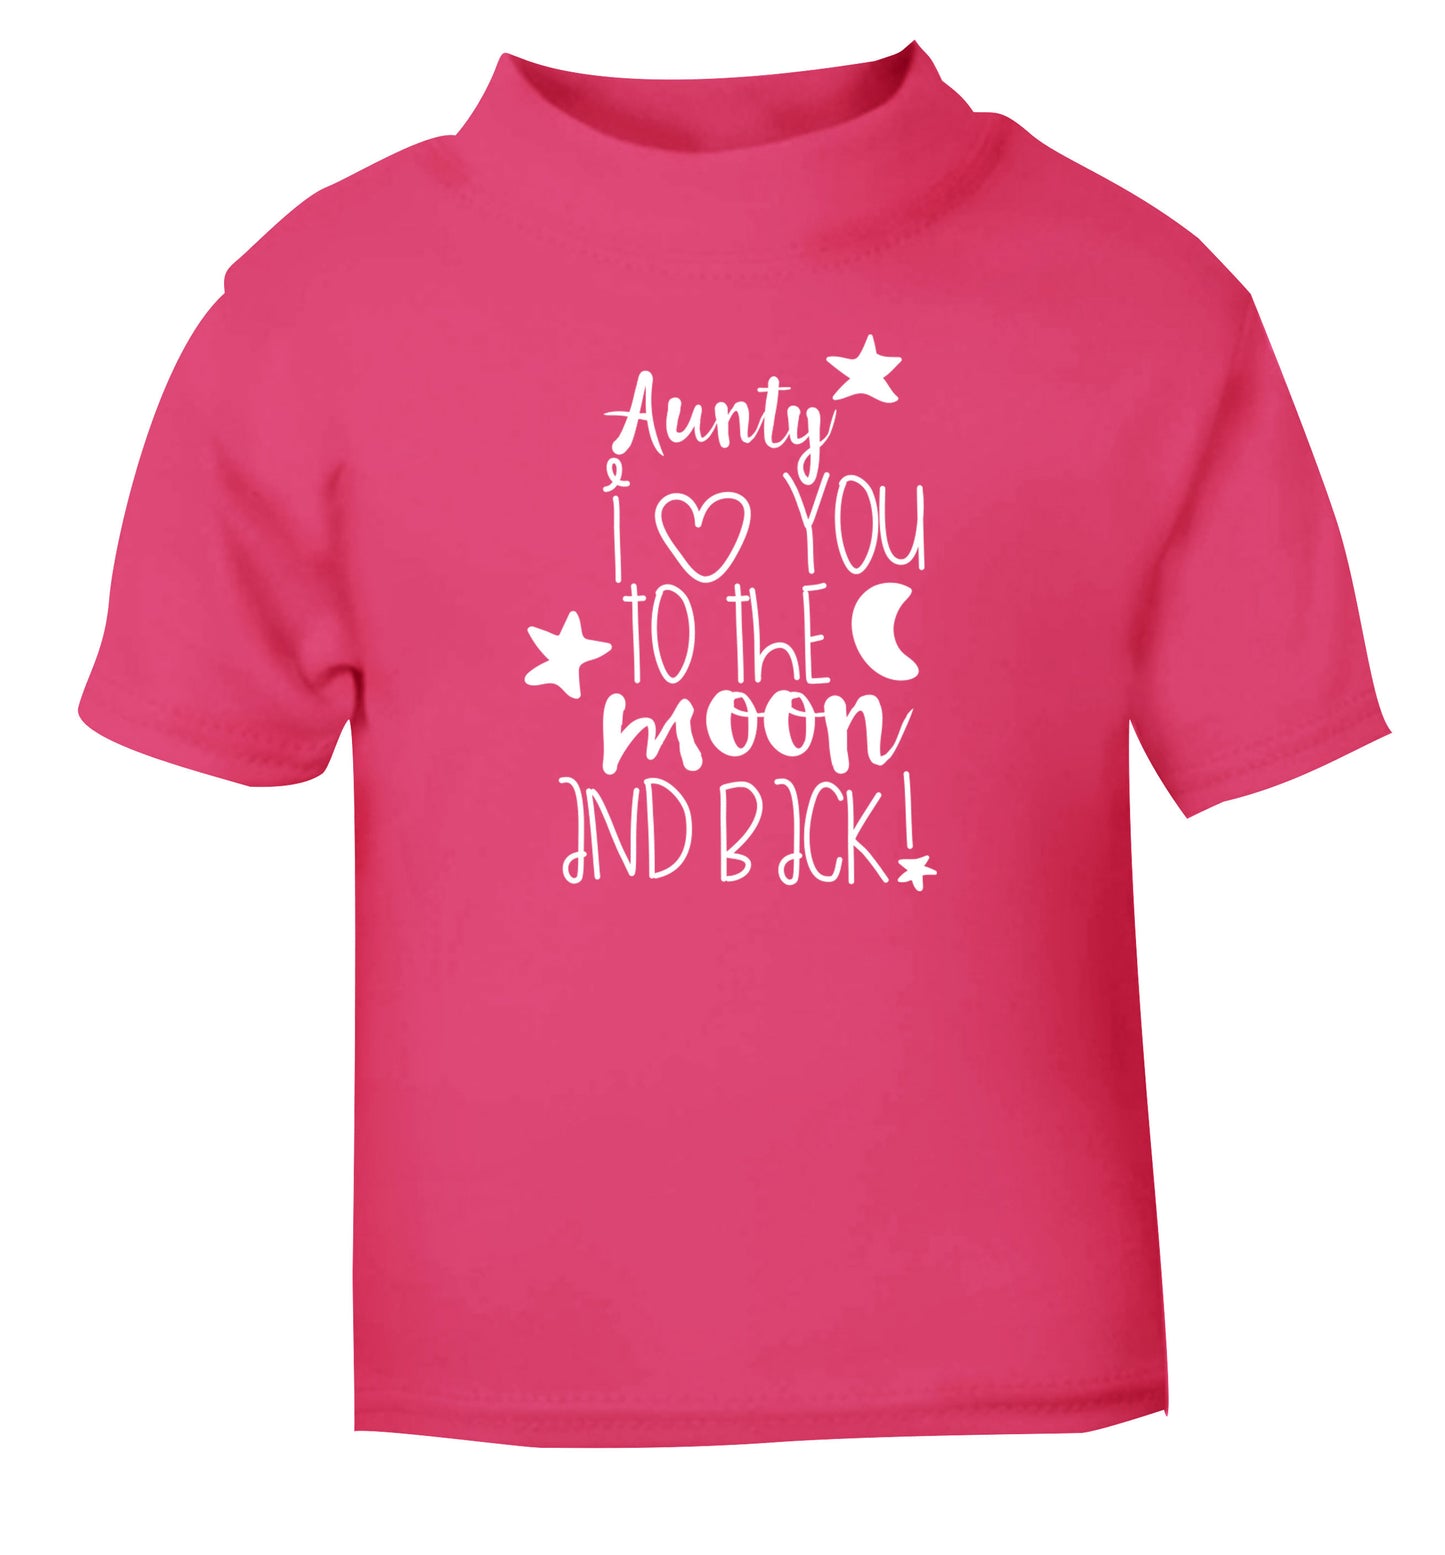 Aunty I love you to the moon and back pink Baby Toddler Tshirt 2 Years